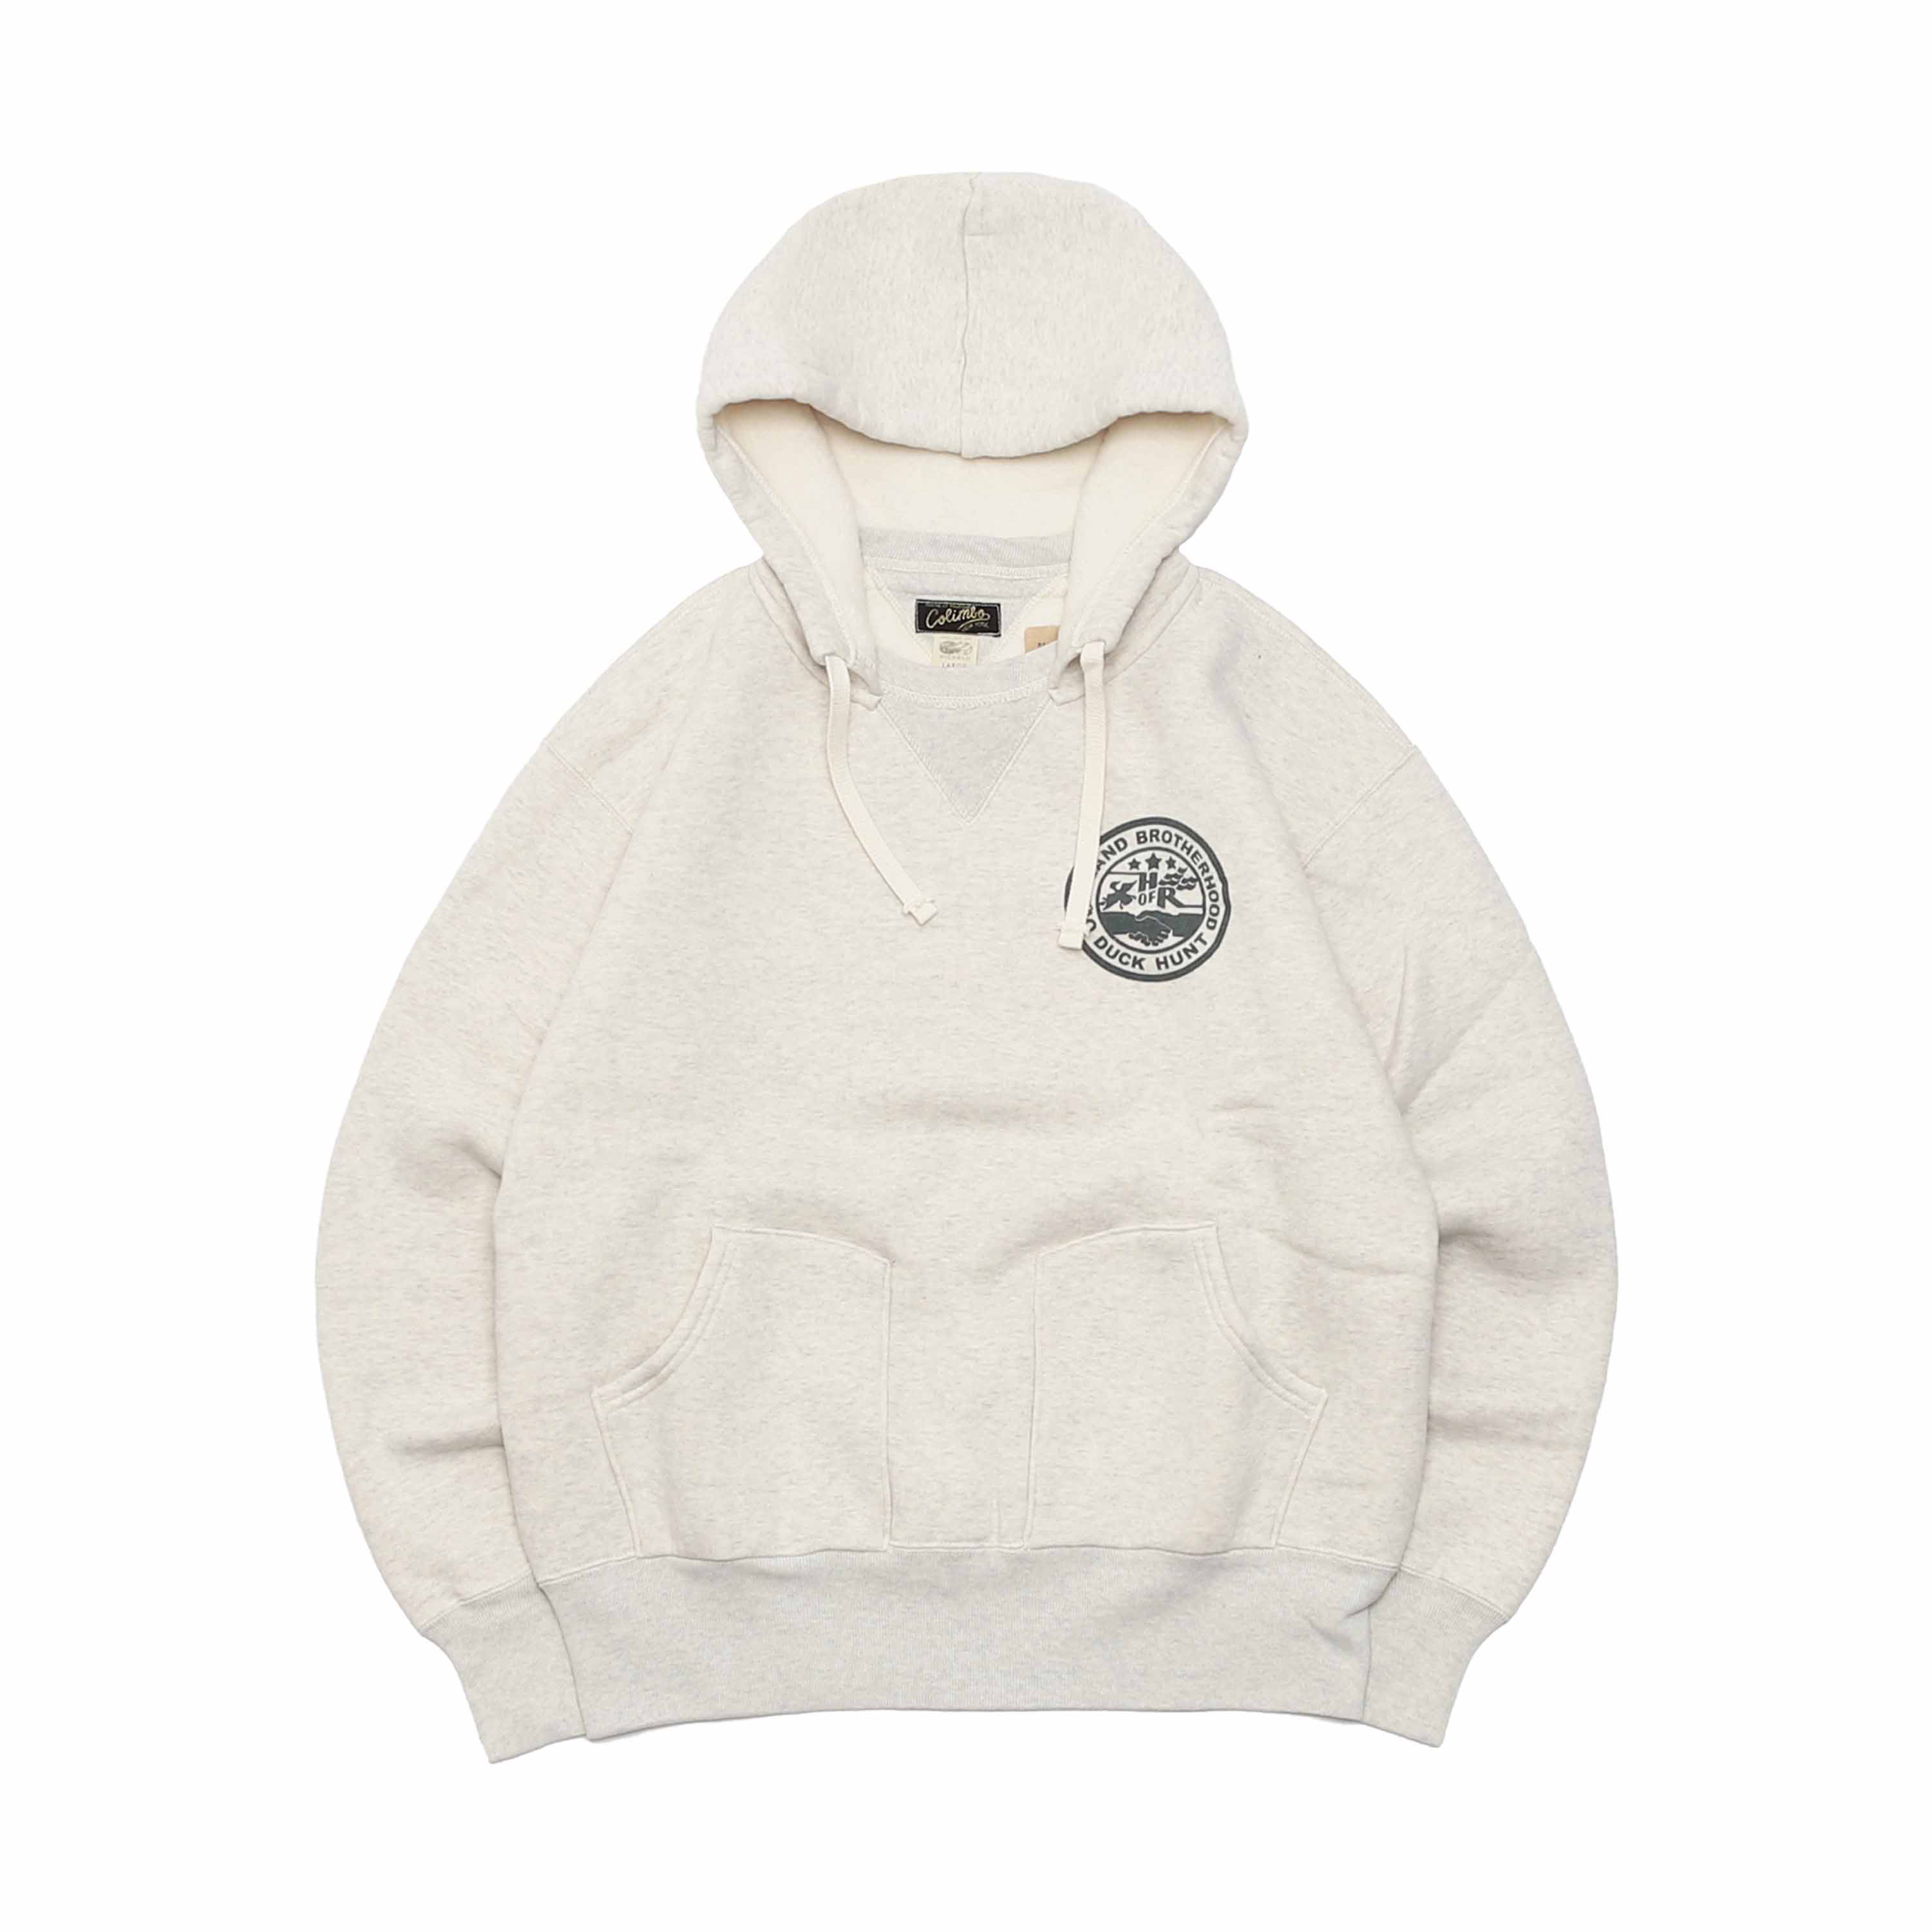 ATTACHED HOODY(G.HUNT) - OATMEAL